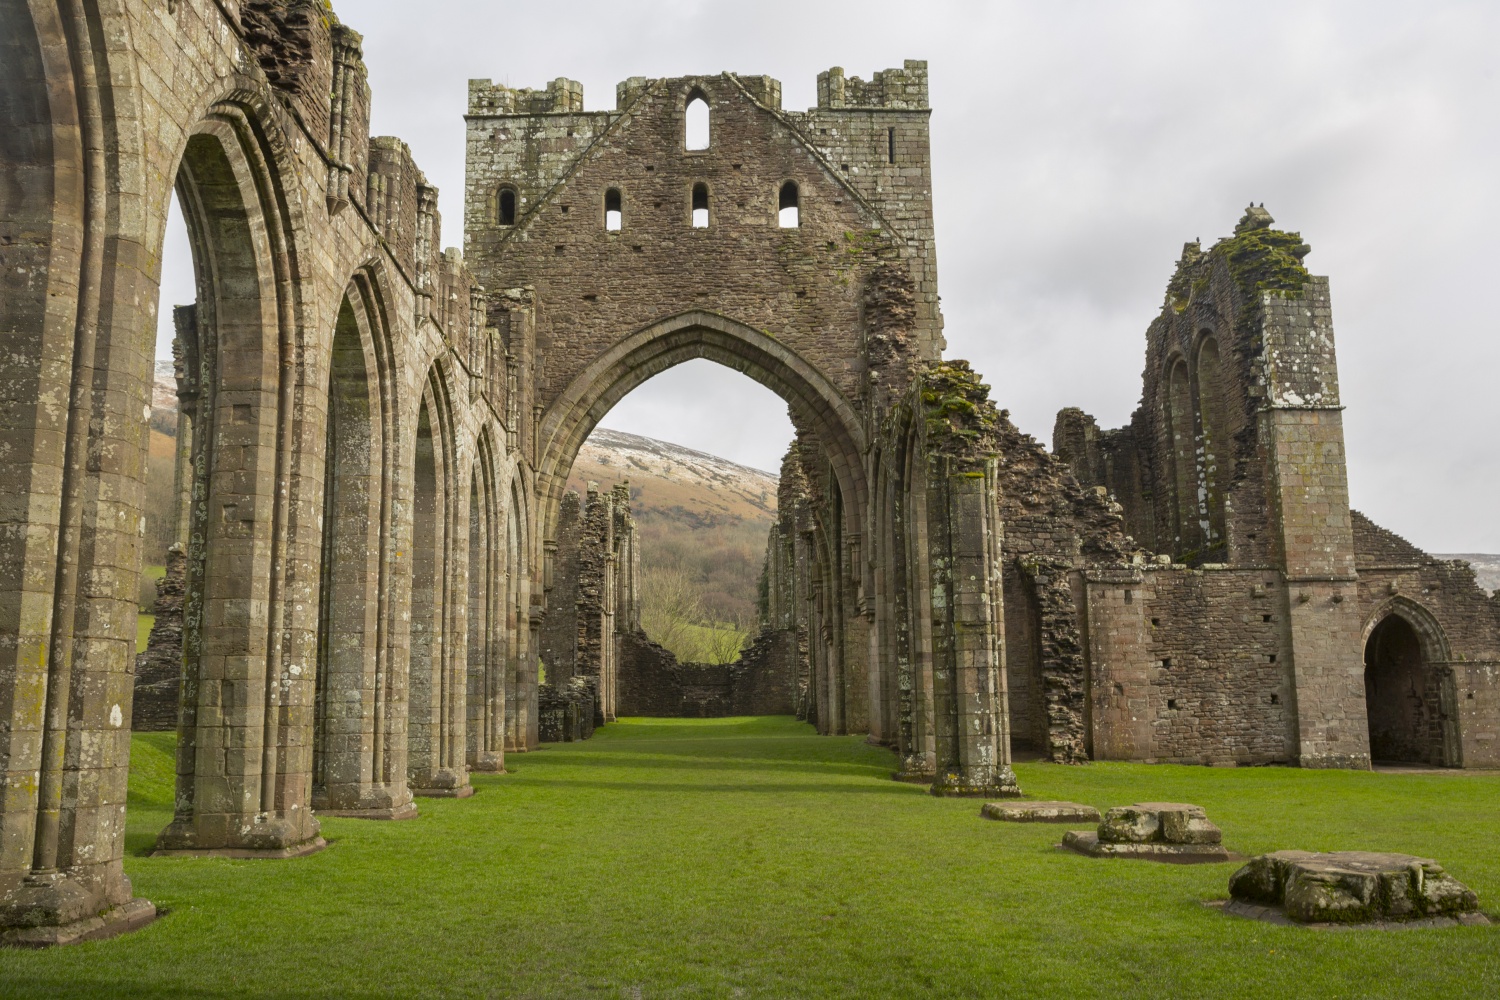 Gothic style ruins with archways - Llanthony Priory, Beacons Way